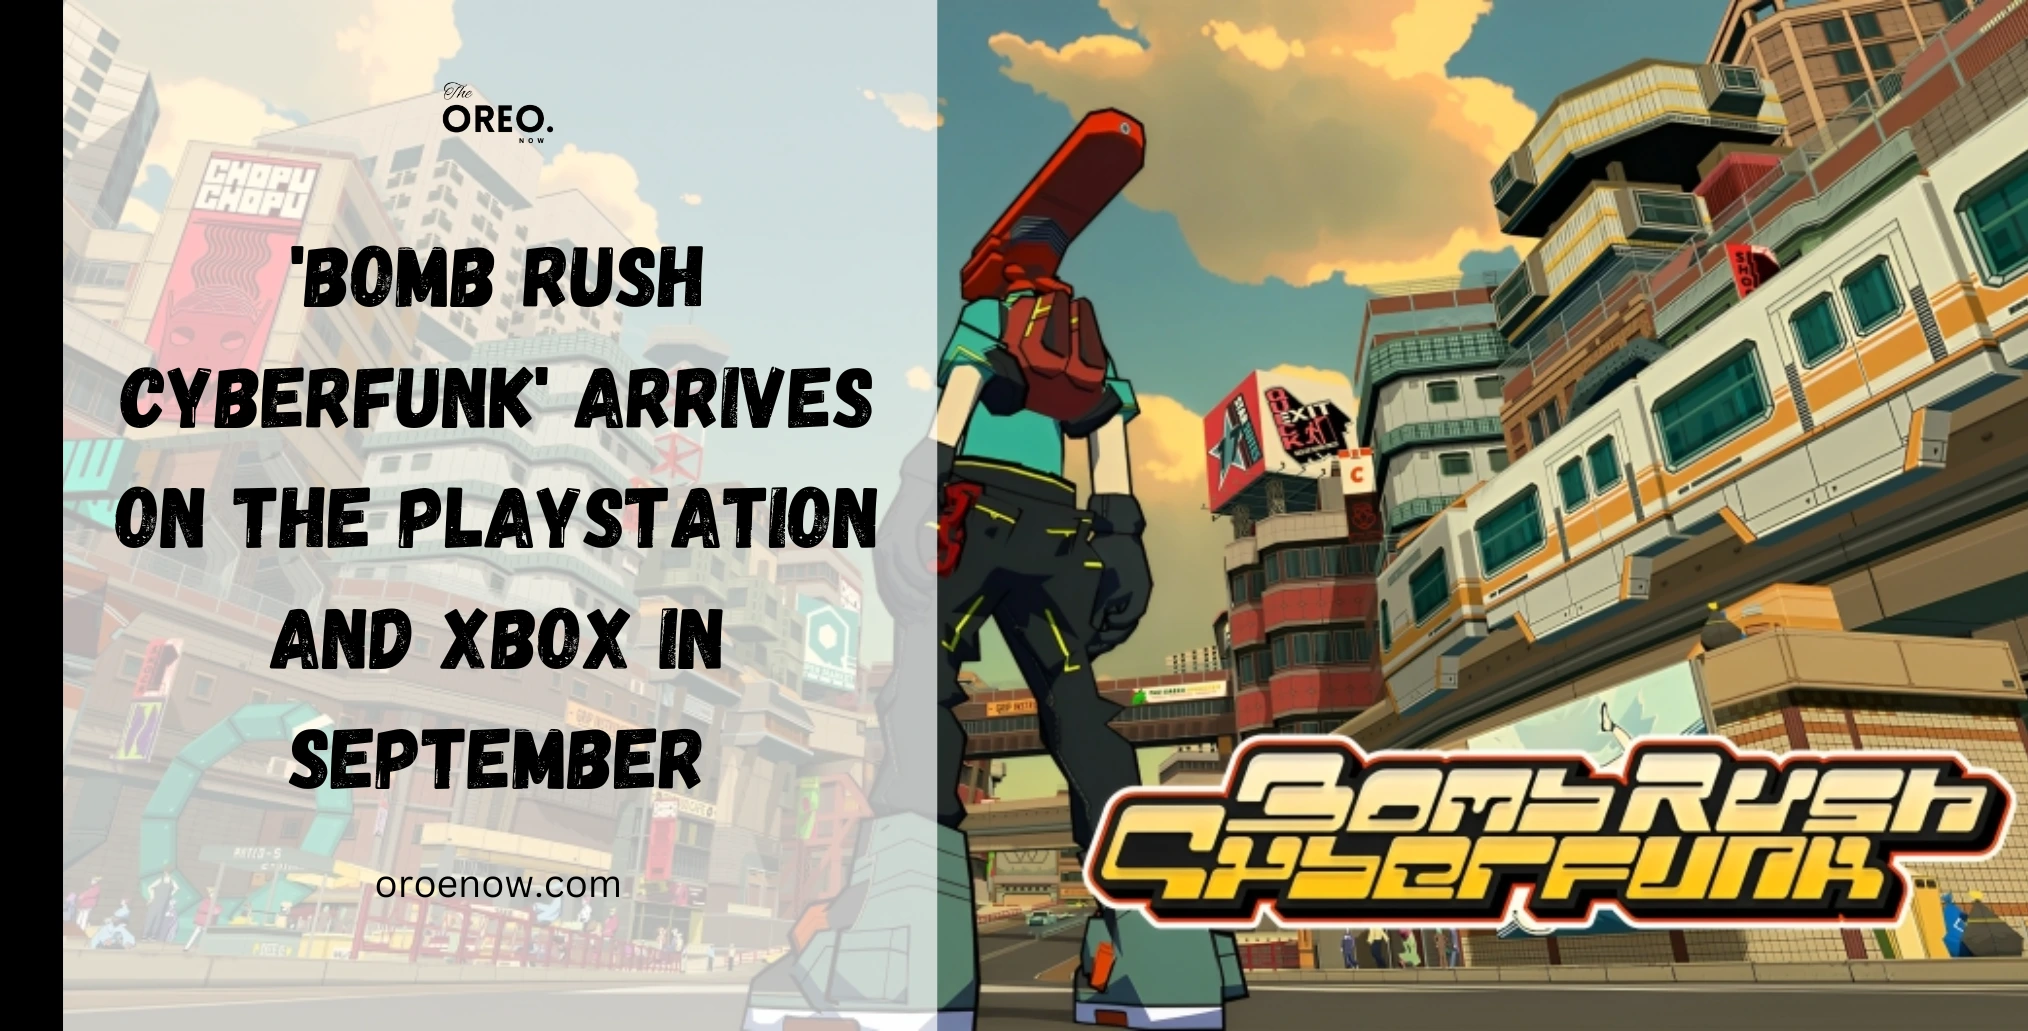 PlayStation and Xbox Debut of Bomb Rush Cyberfunk (1)